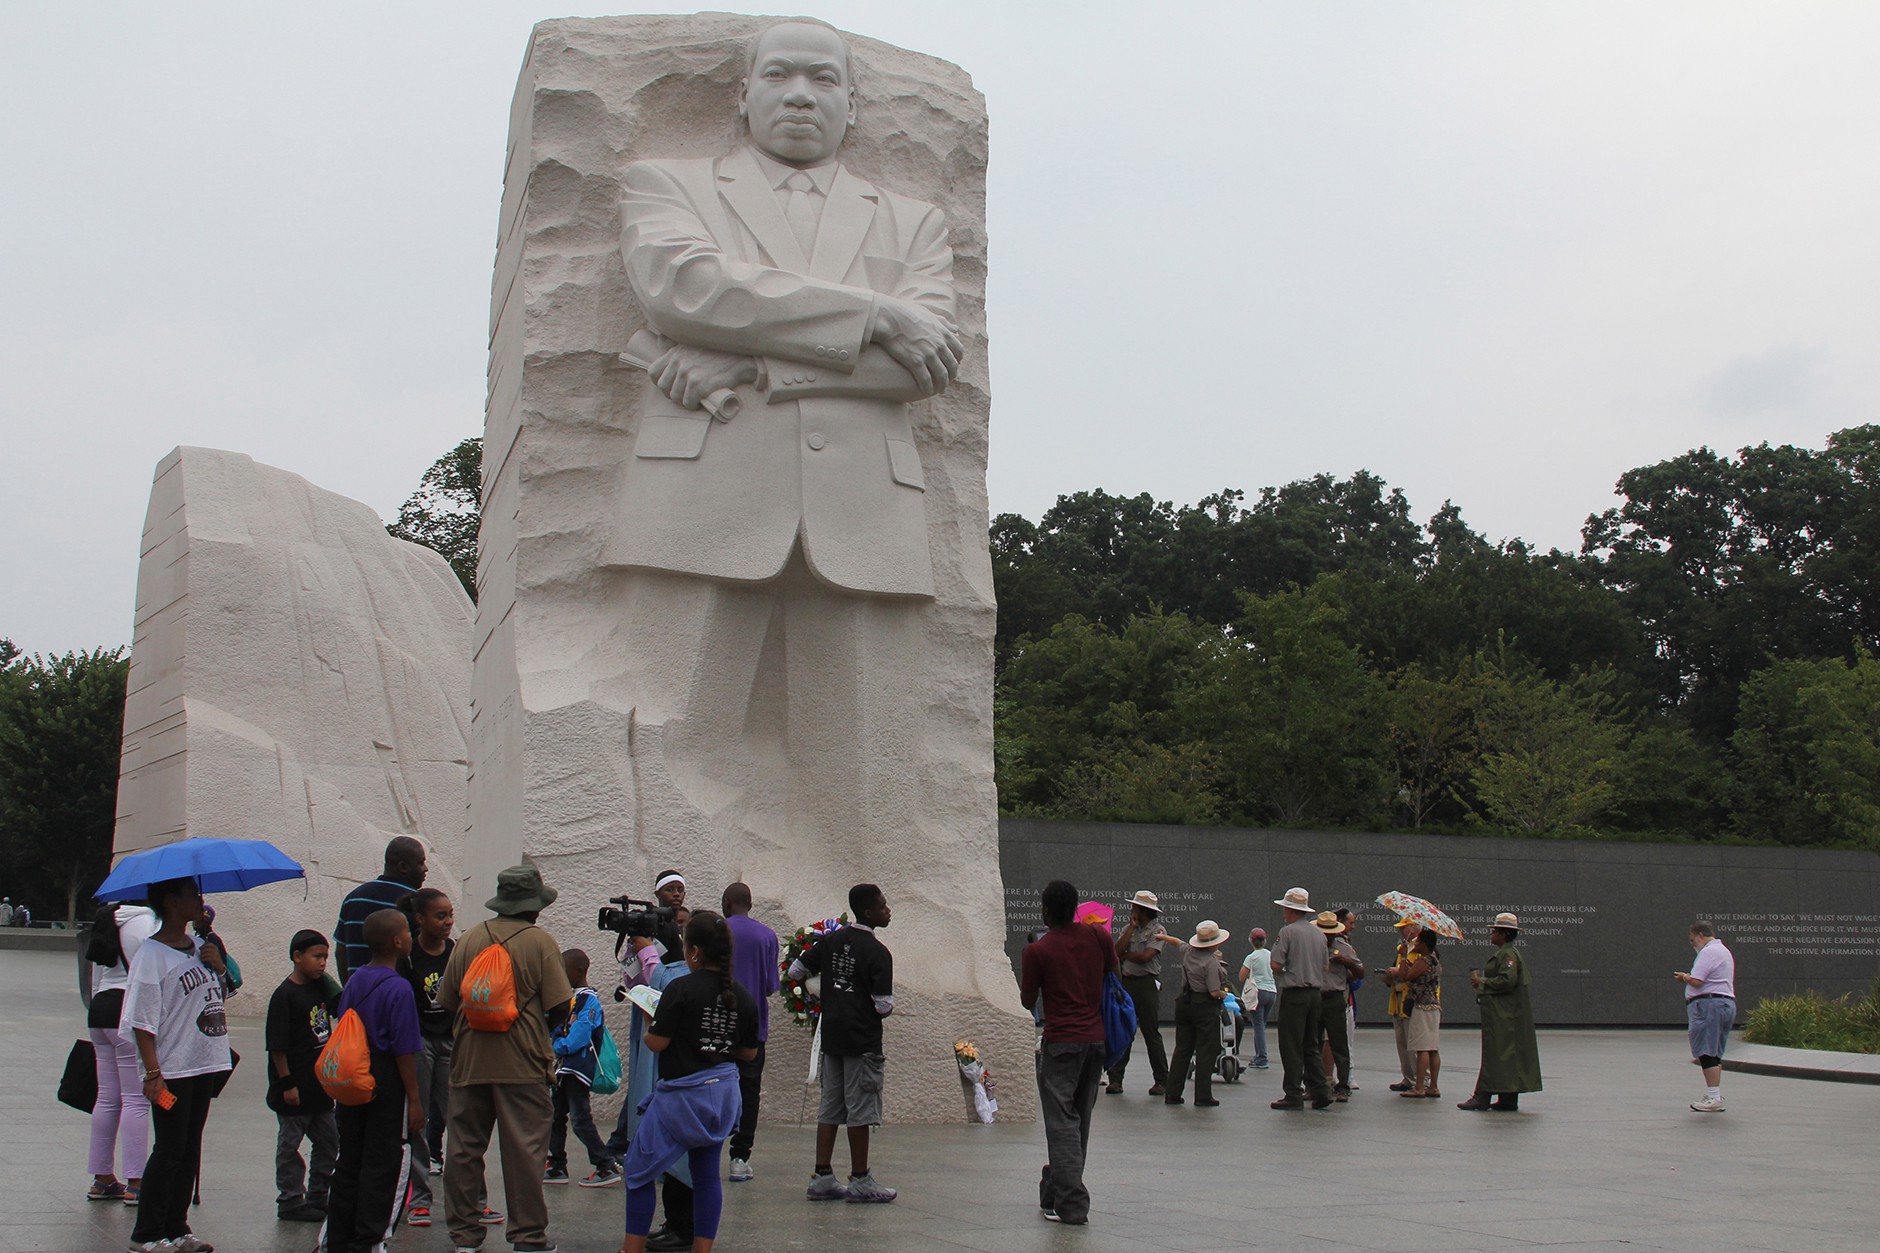 A group of visitors from New York gathers at the Martin Luther King Jr. Memorial on the 50th anniversary of King's historic March on Washington, which was being celebrated nearby on the Mall.